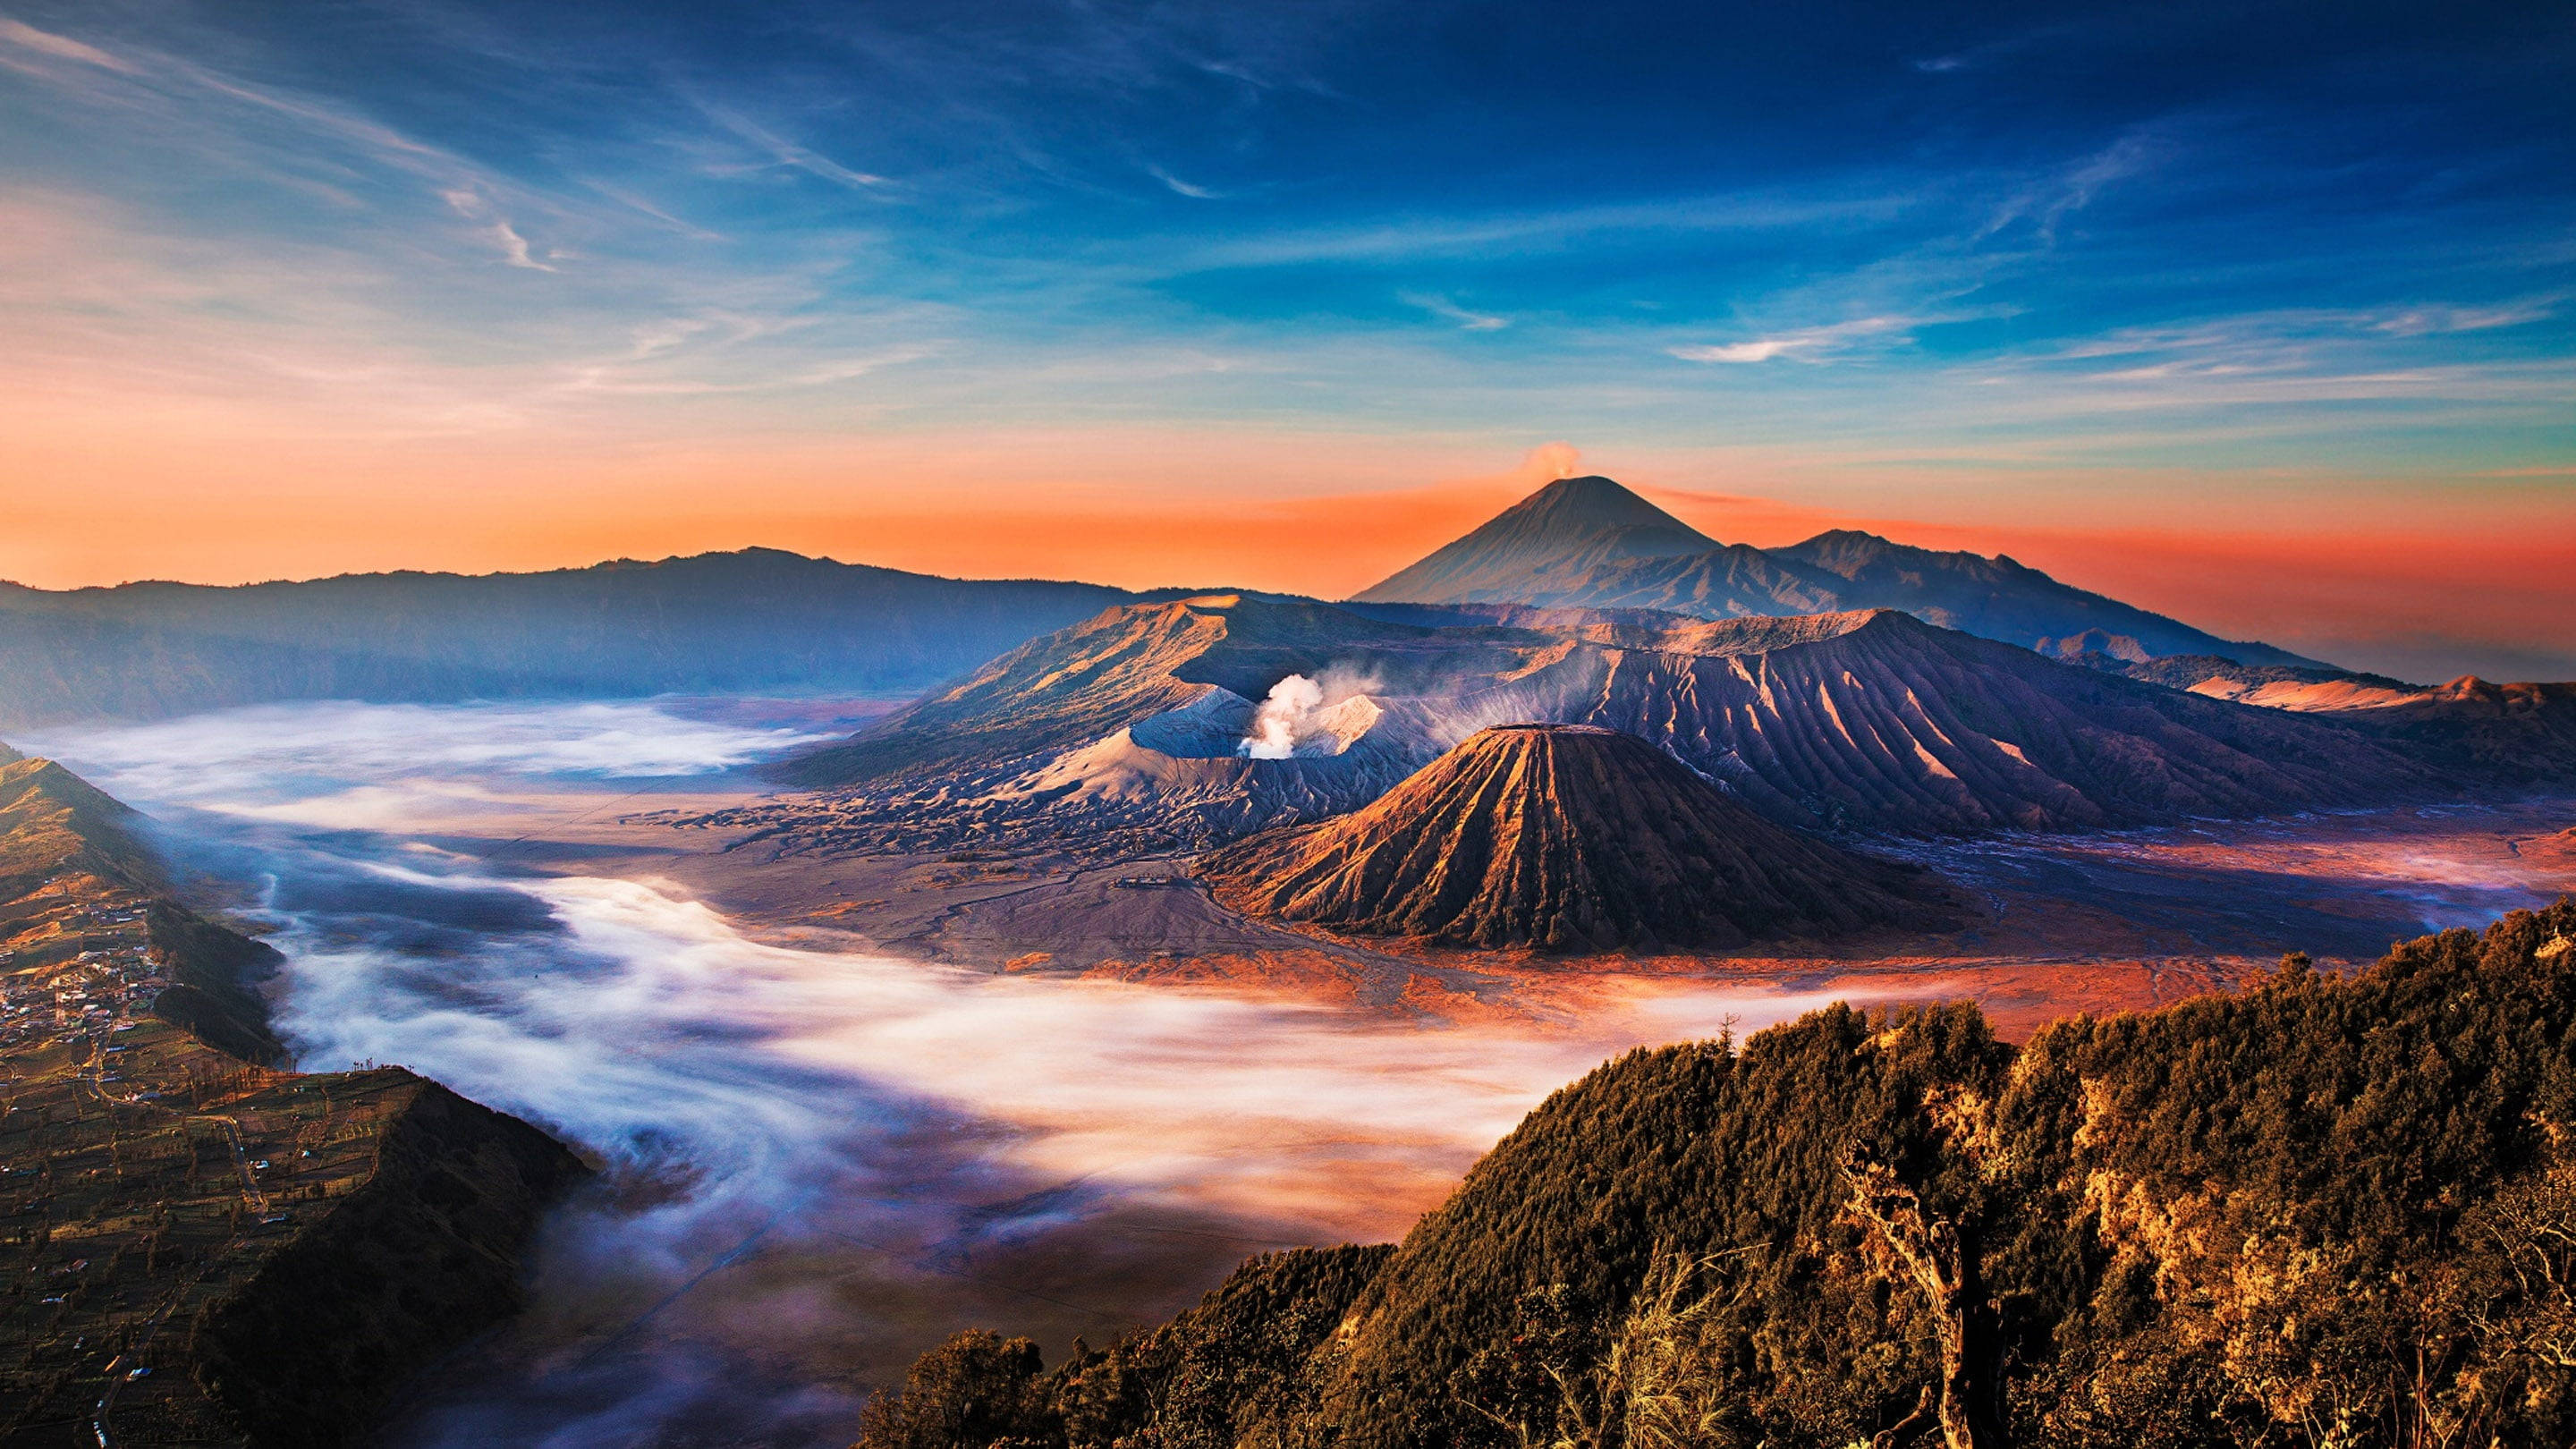 Volcano And Mountains Professional Desktop Wallpaper